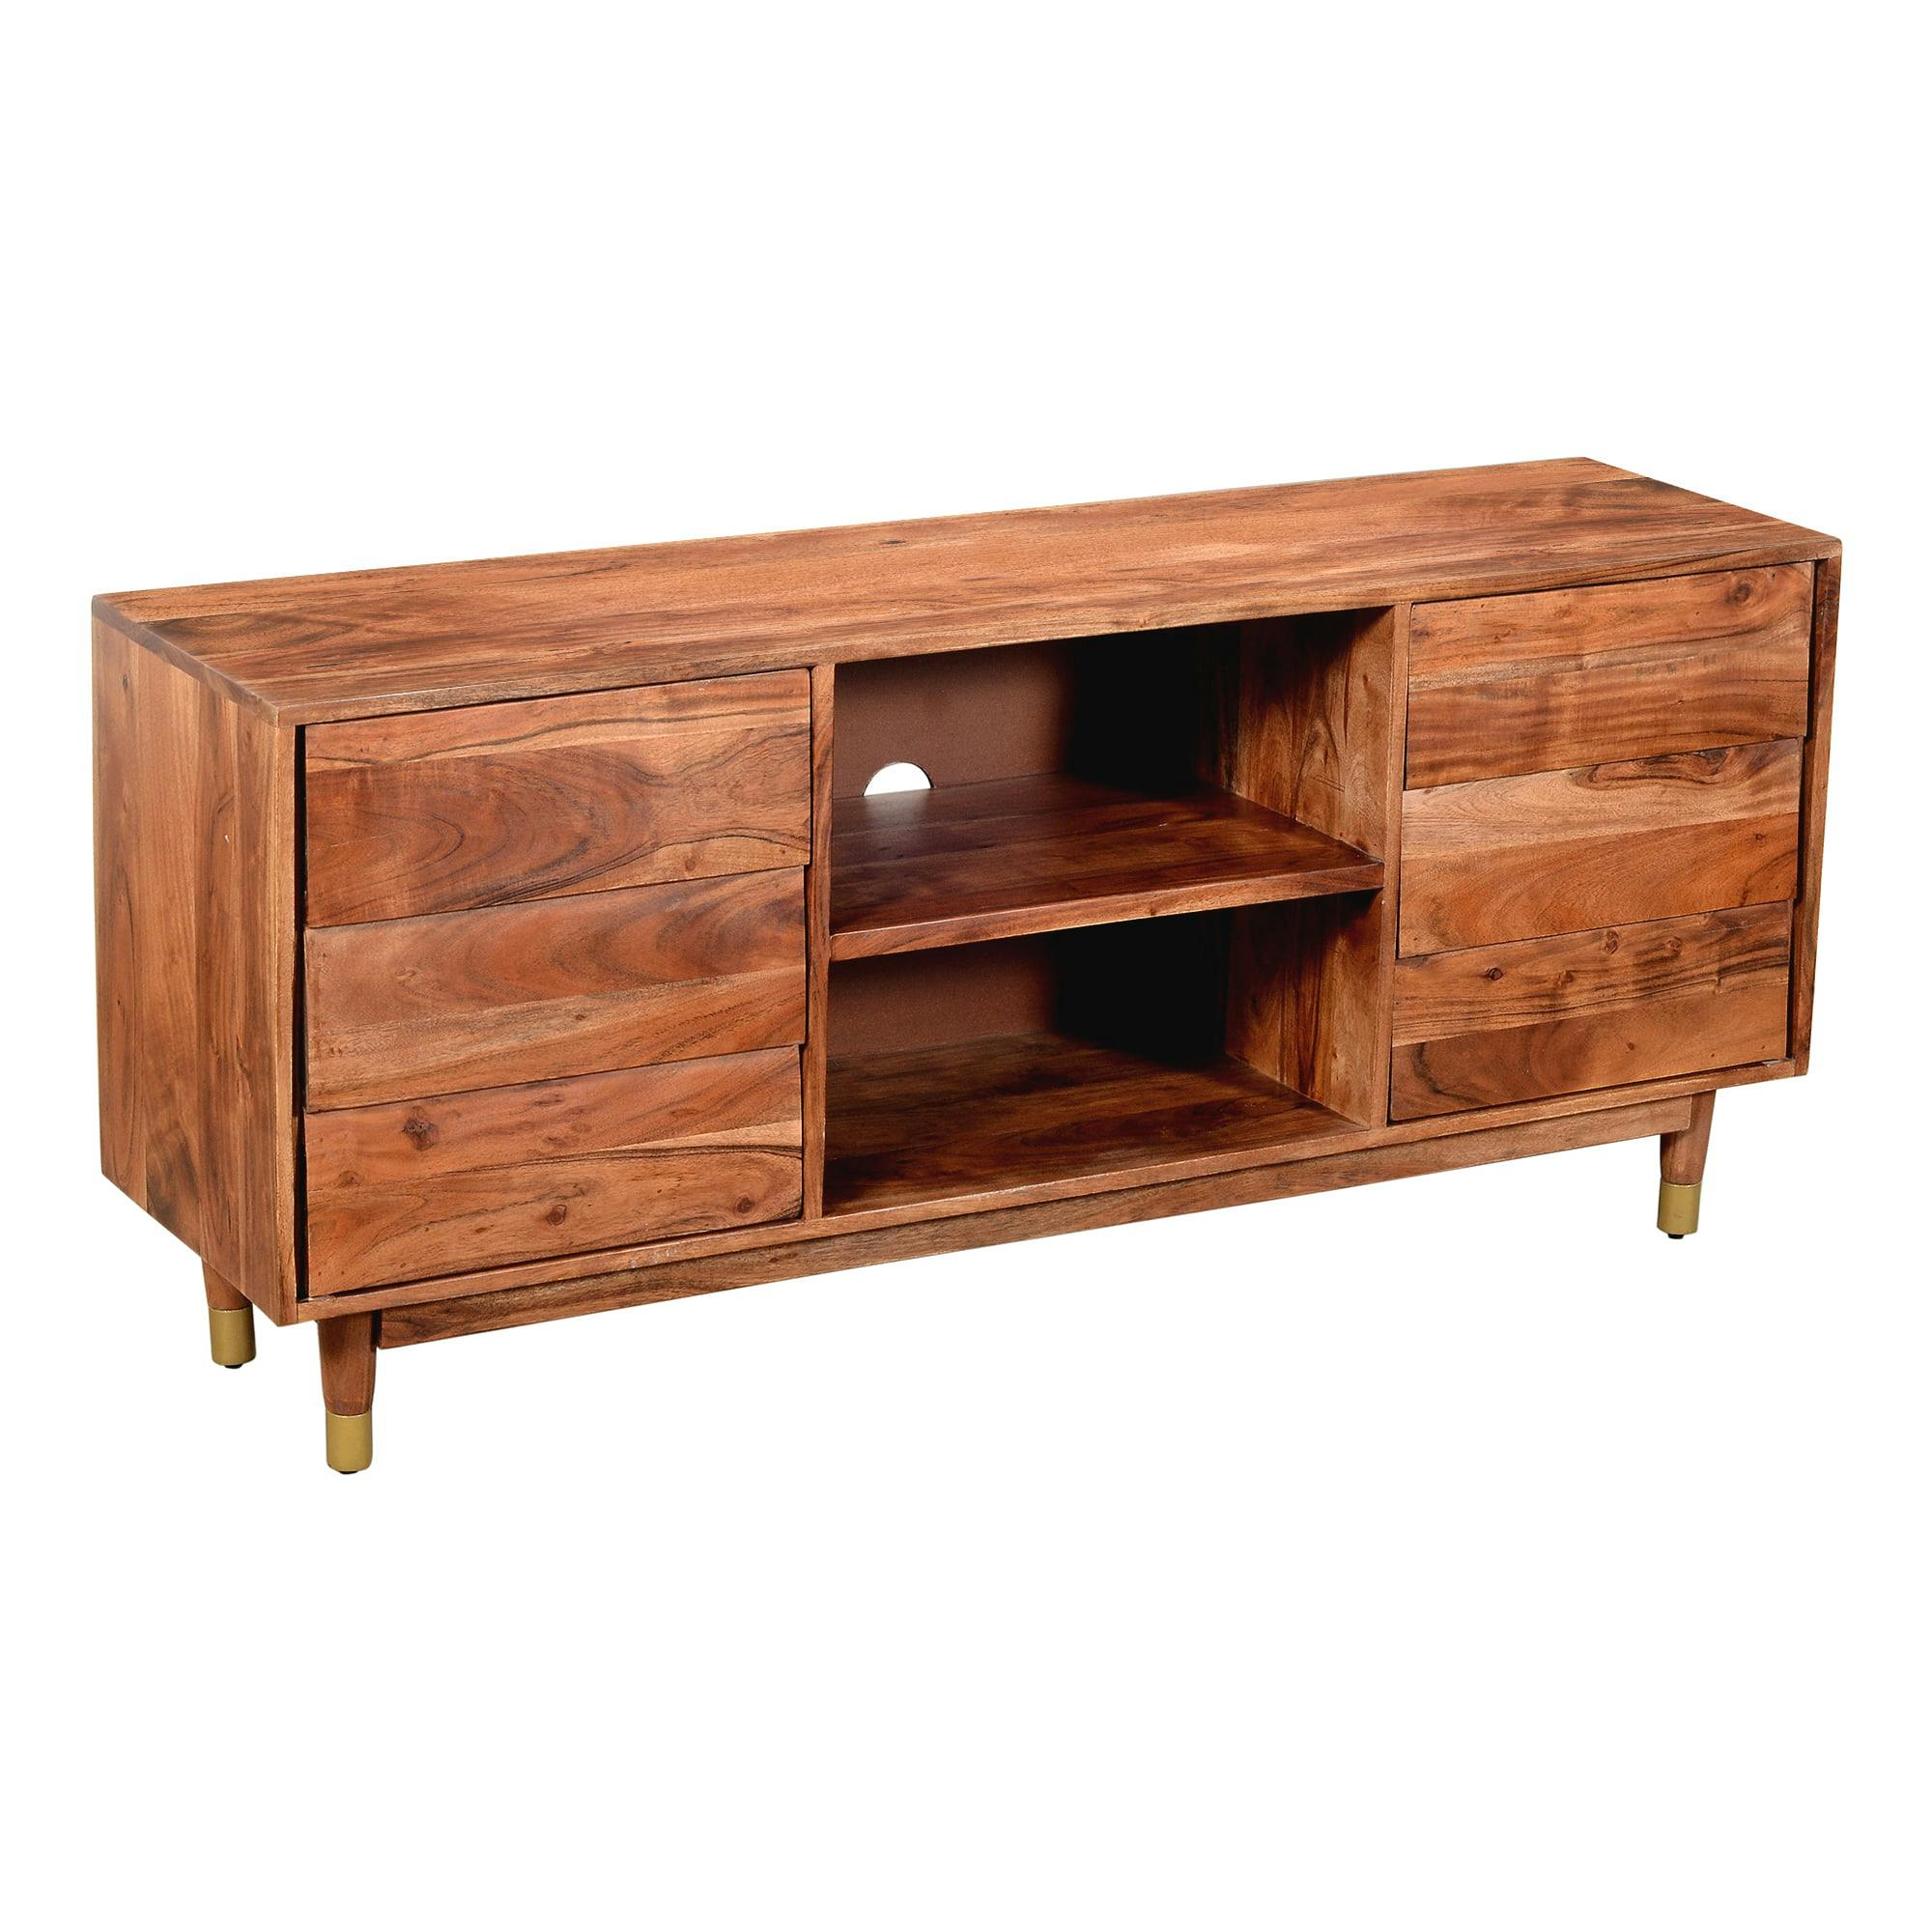 Corrine 60" Brown Handcrafted Wooden Media Console with Live Edge Shutter Doors